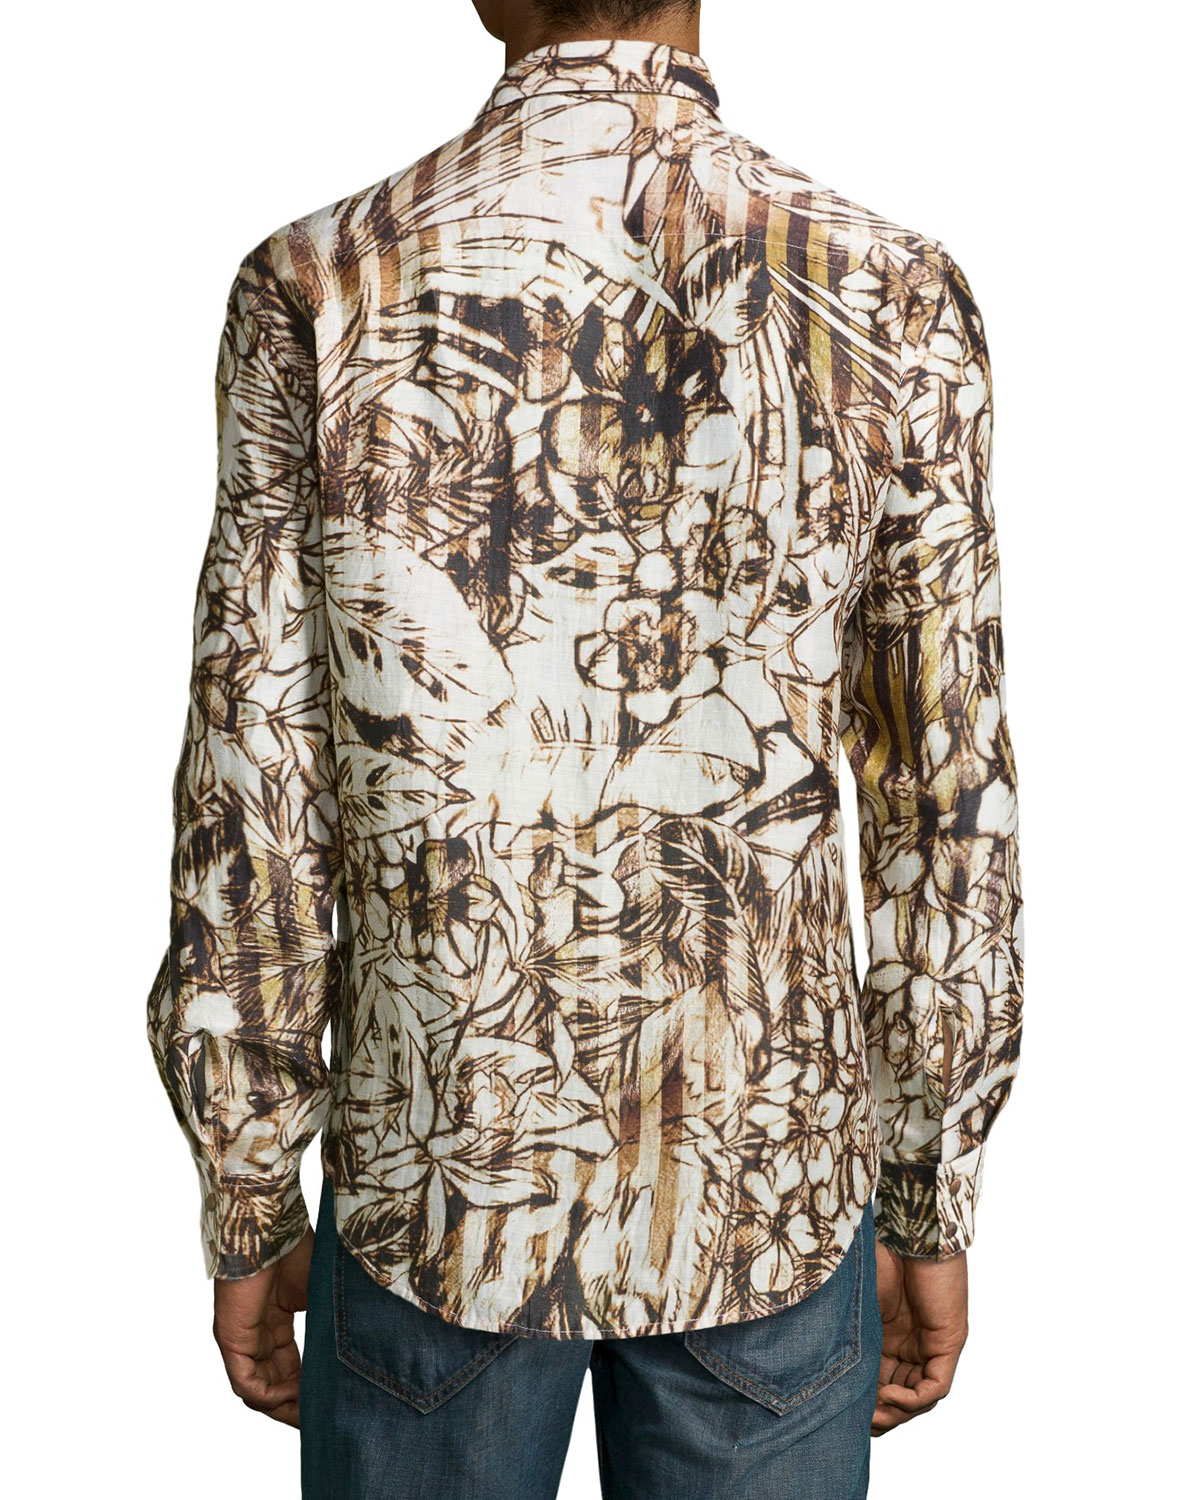 Lyst - Robert Graham Durante Limited L/S Woven Sport Shirt in Brown for Men